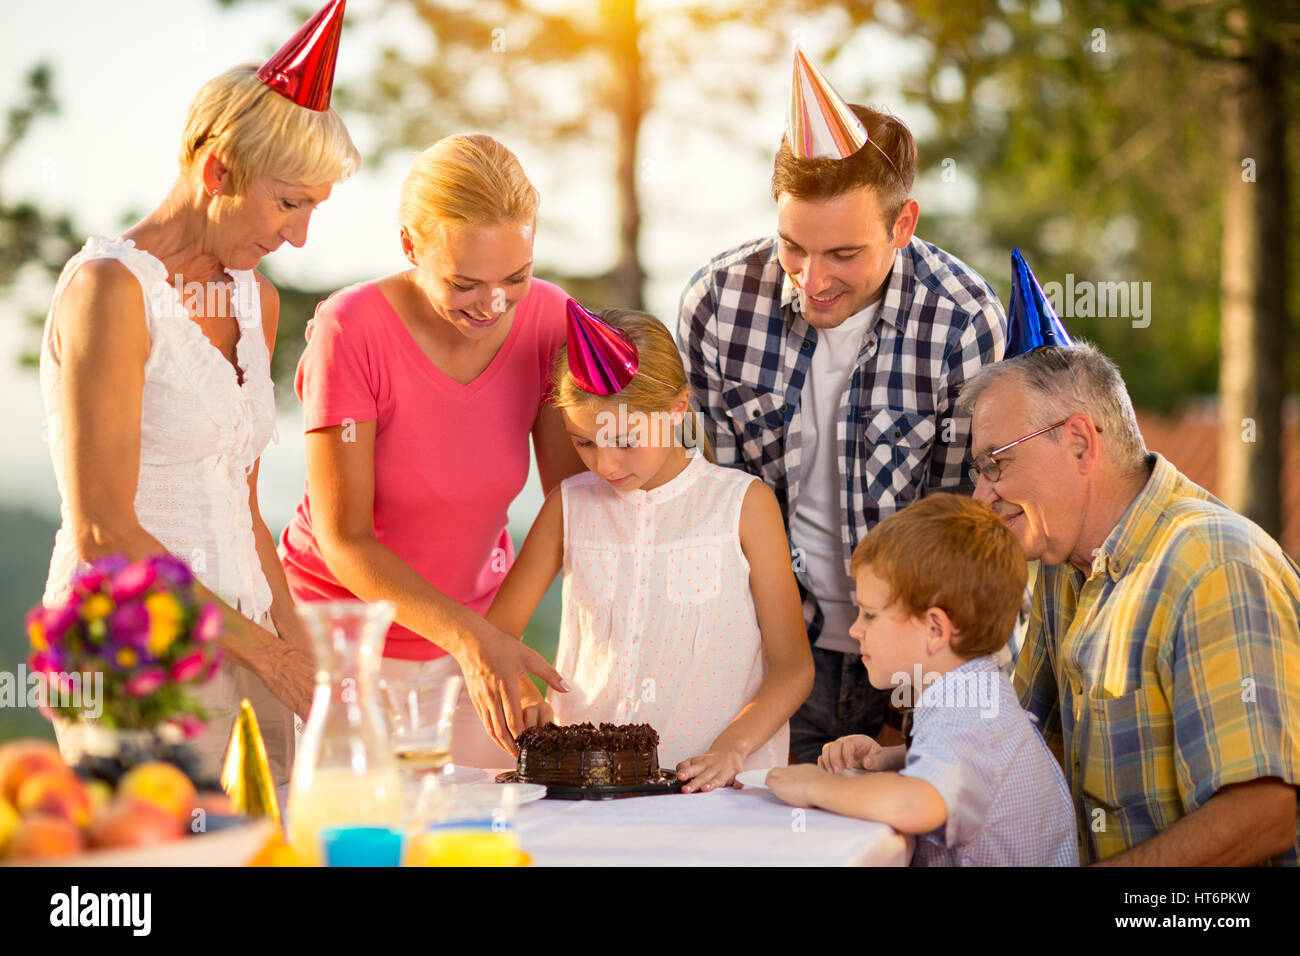 mother helping female child with birthday cake Stock Photo